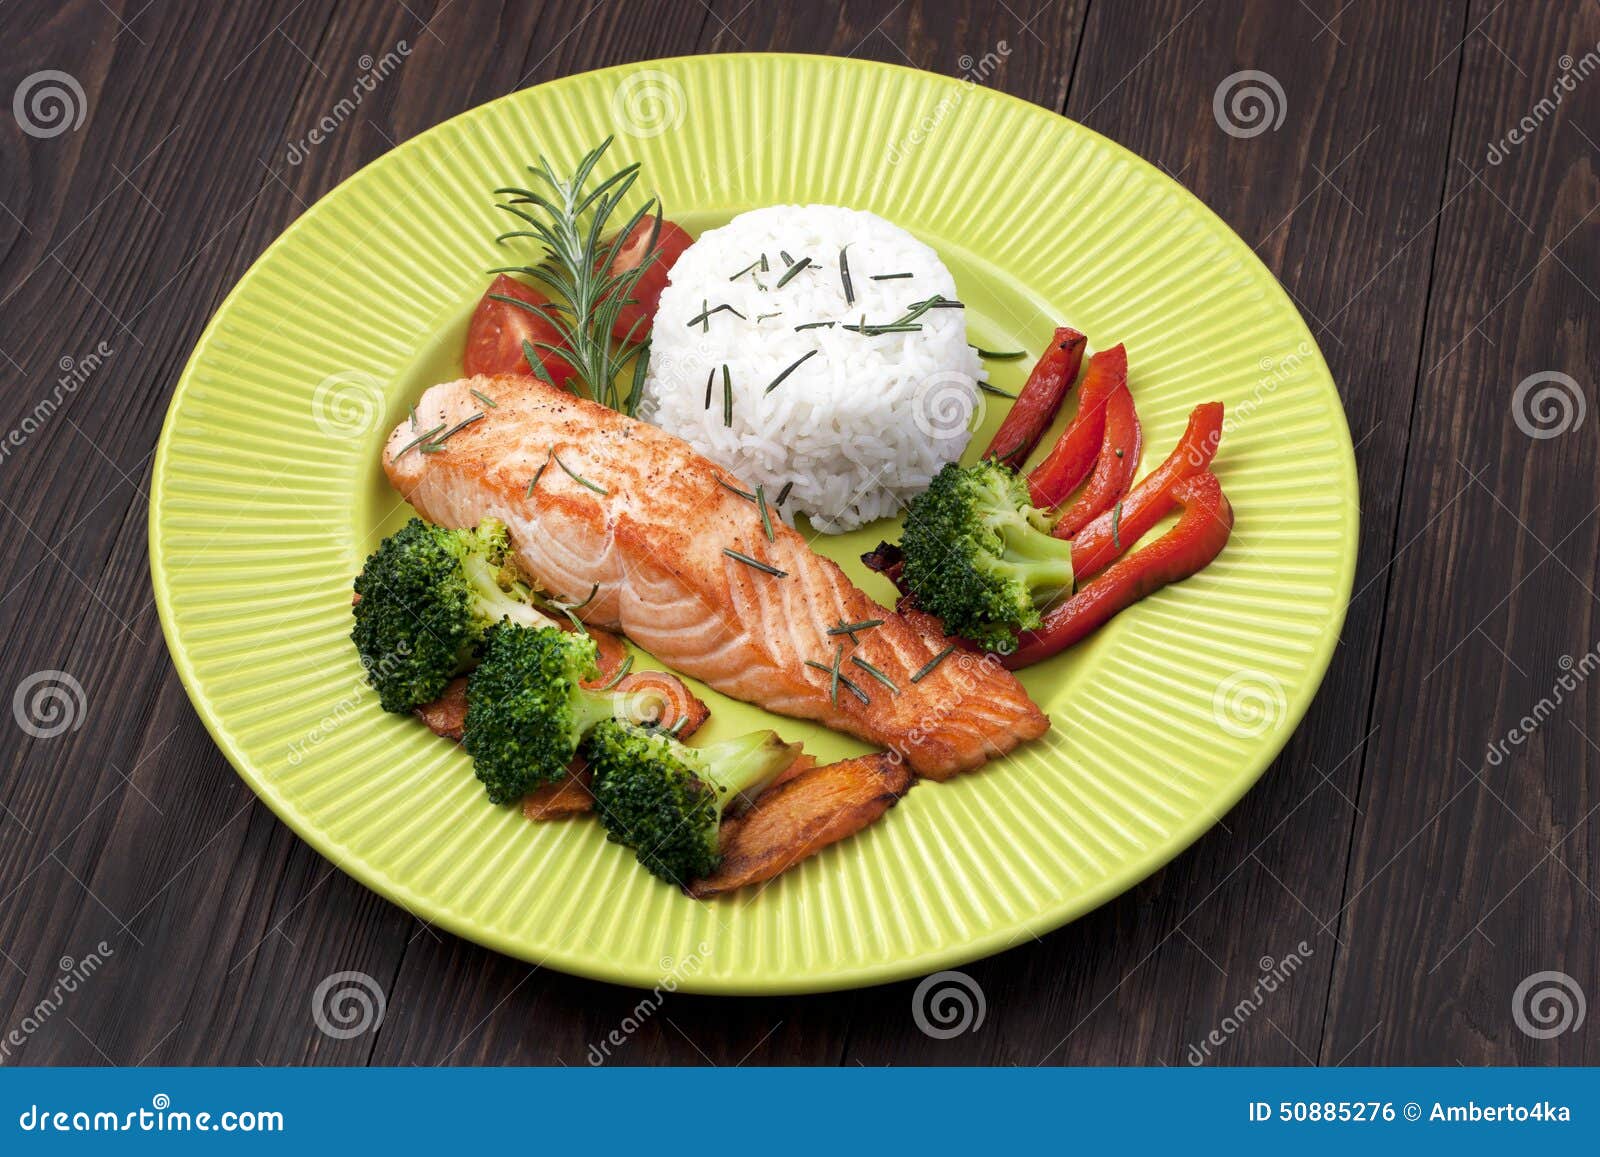 Salmon Steak Red Fish with Rice Garnich Stock Photo - Image of fillet ...